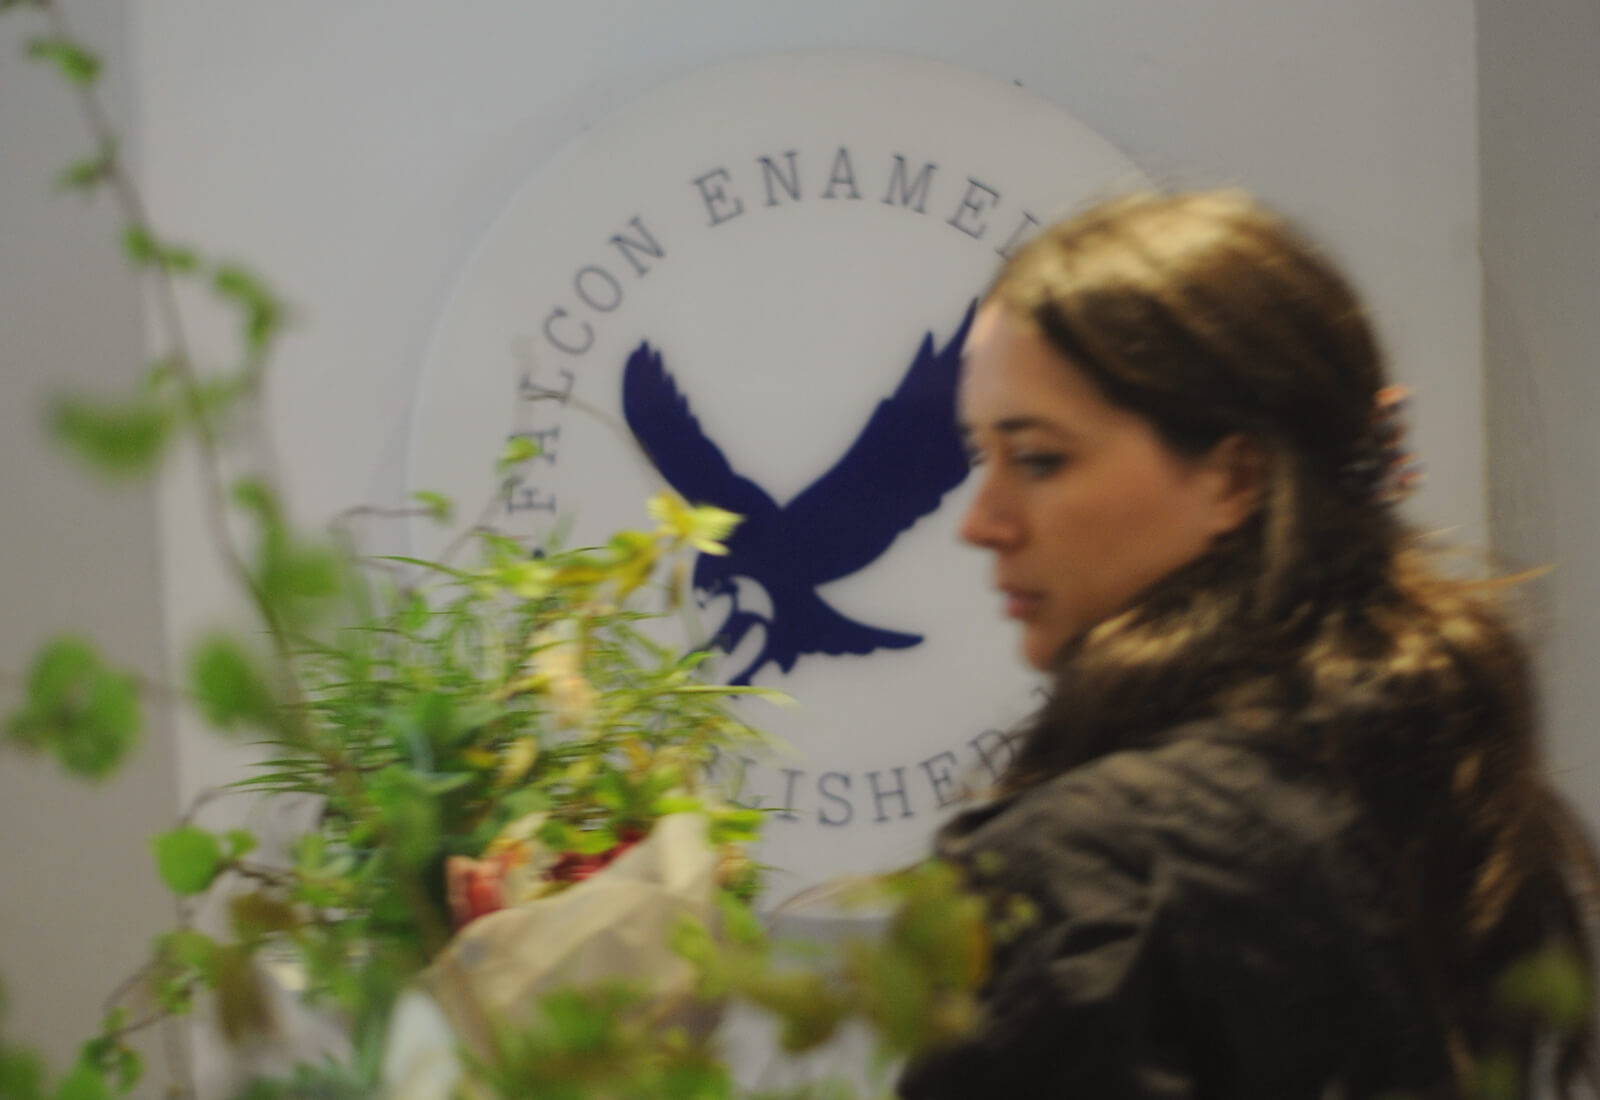 Paris Alma carrying flower in fornt of the blue and white Falcon wall display sign.